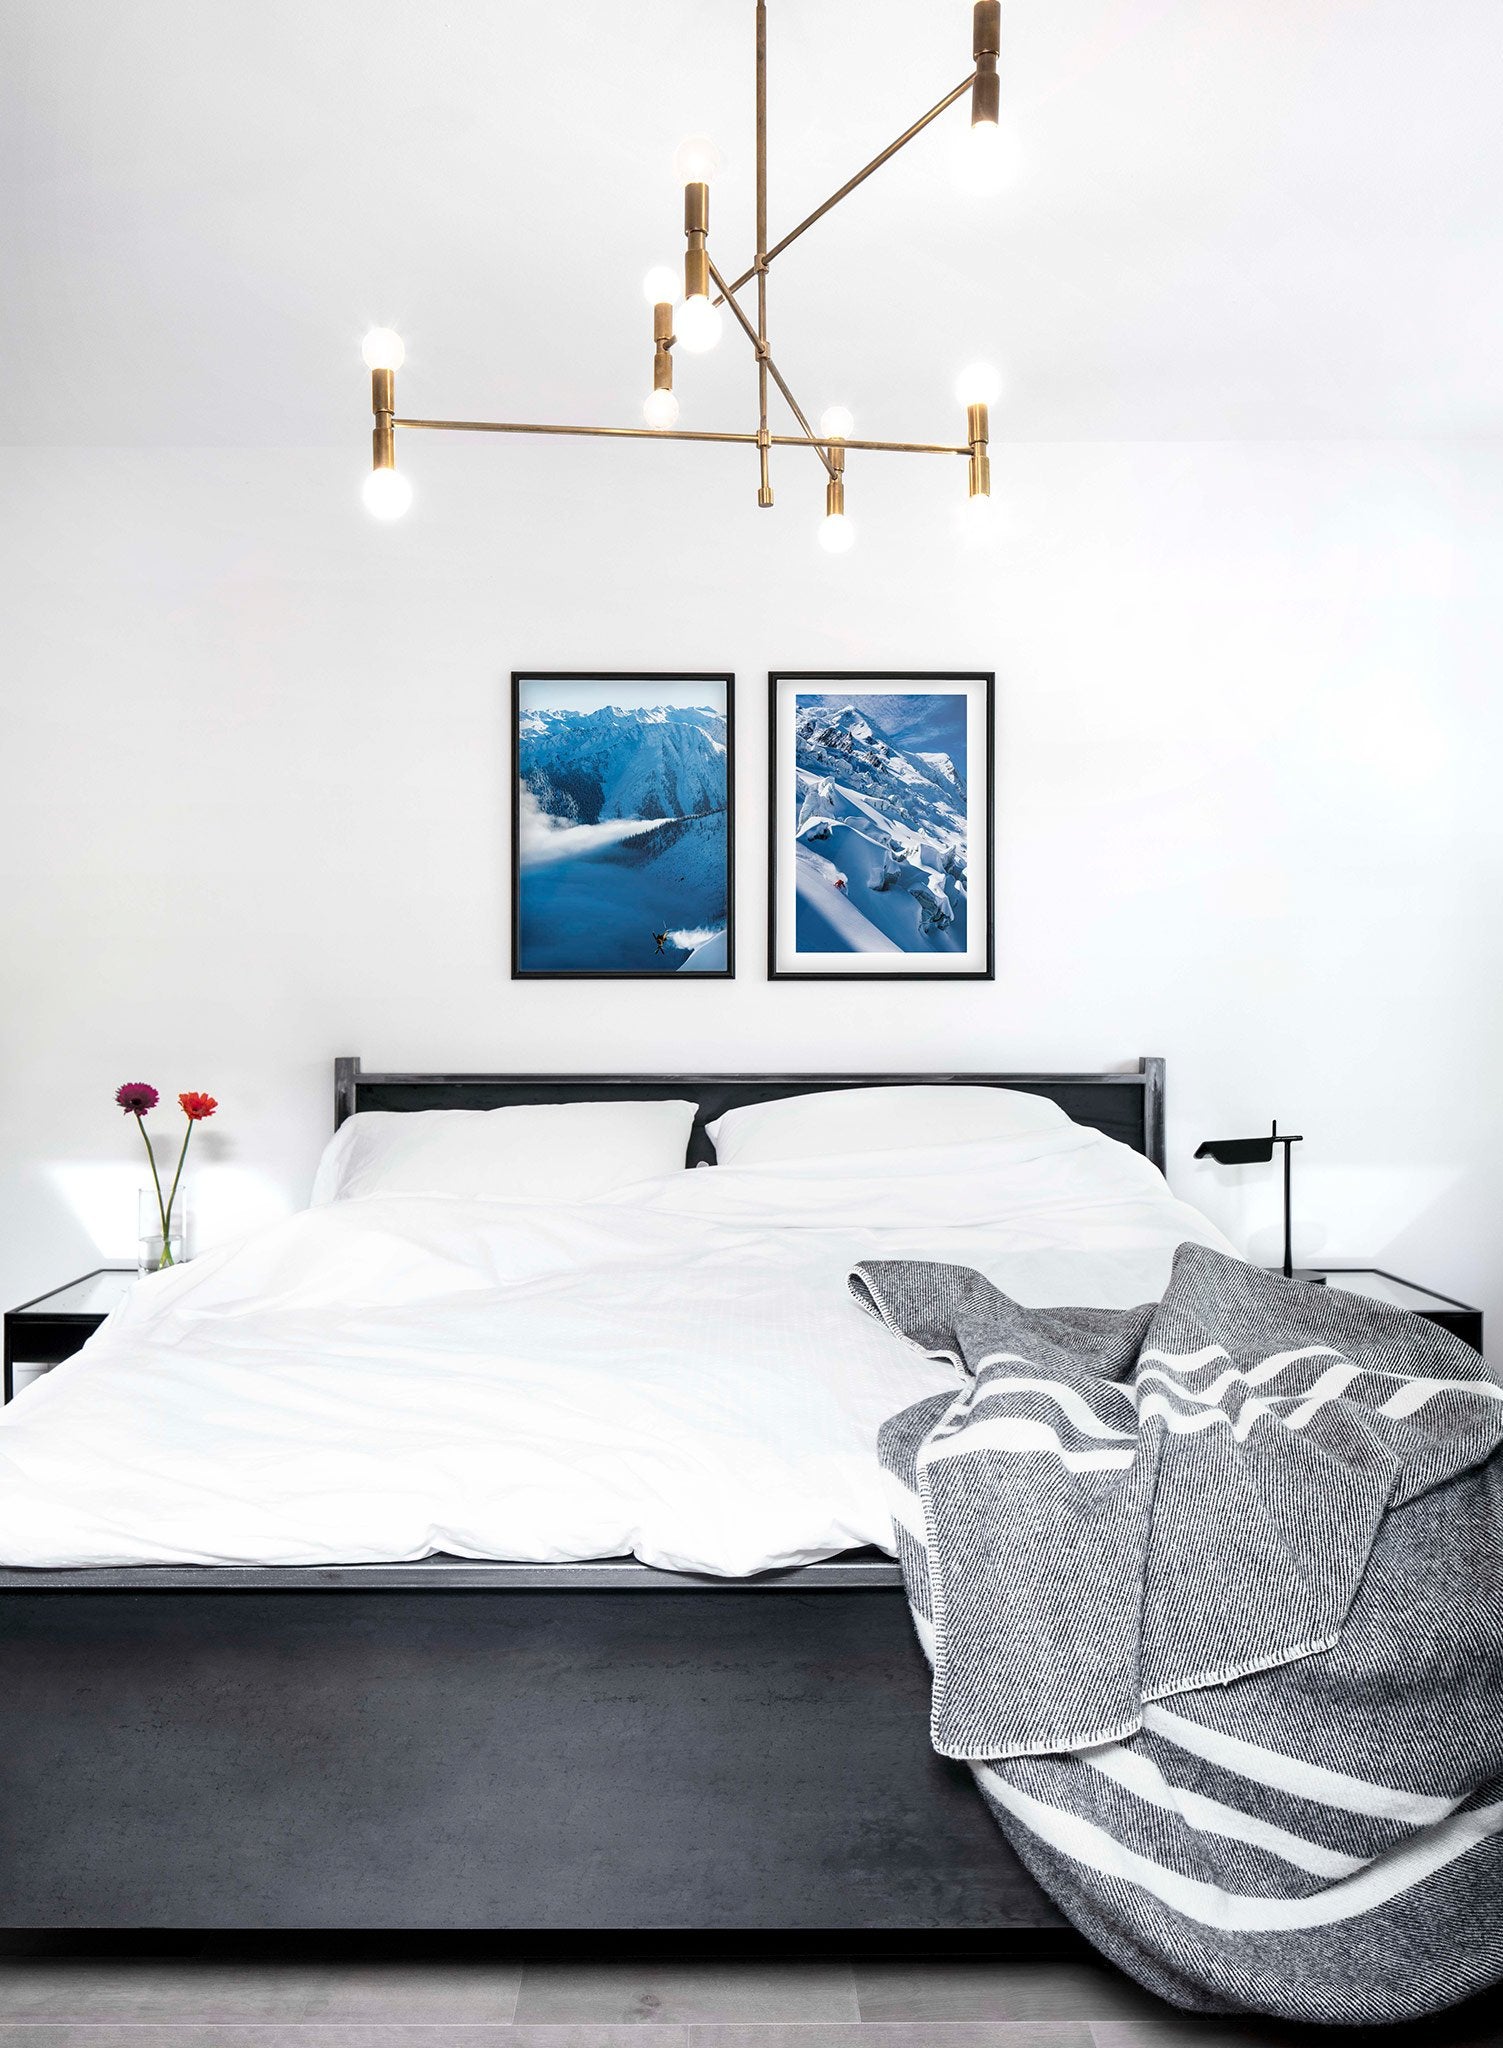 Landscape photography poster by Opposite Wall with mountain and freestyle skier - Lifestyle Duo - Bedroom